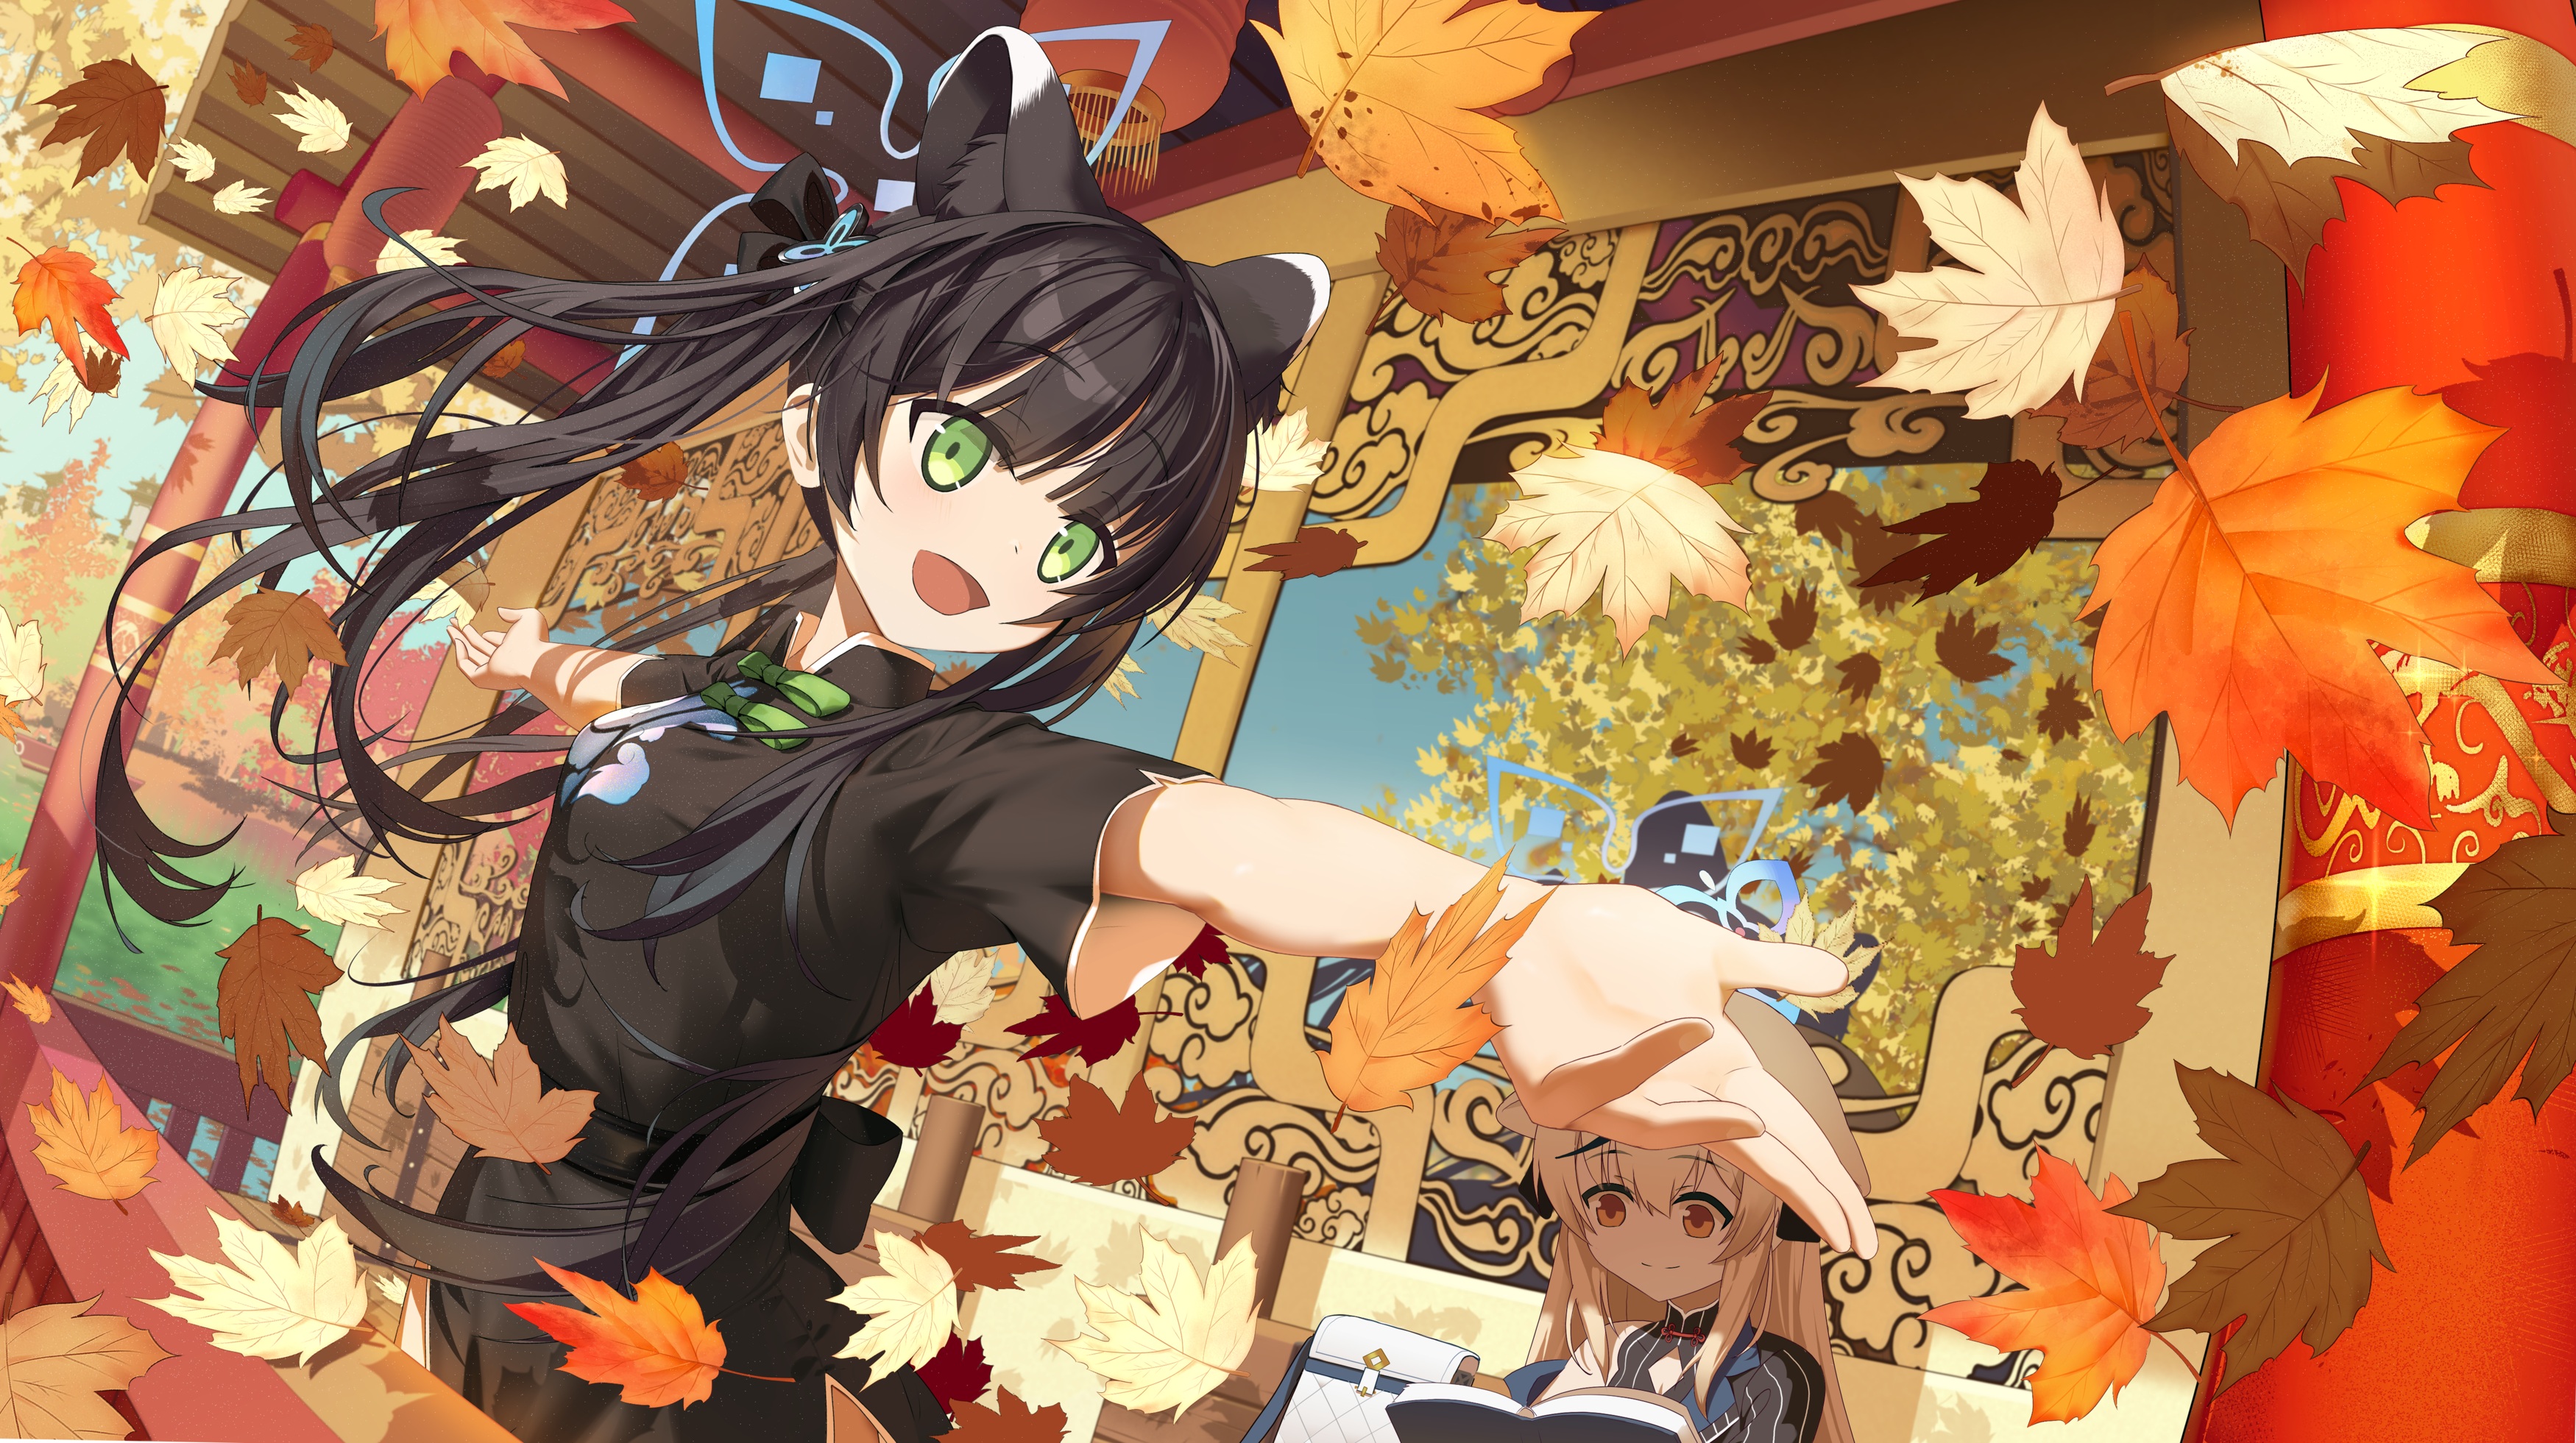 Anime 3500x1961 anime anime girls black hair green eyes leaves smiling Chinese dress long hair arms reaching open mouth purse animal ears bow tie Sunohara Shun Blue Archive